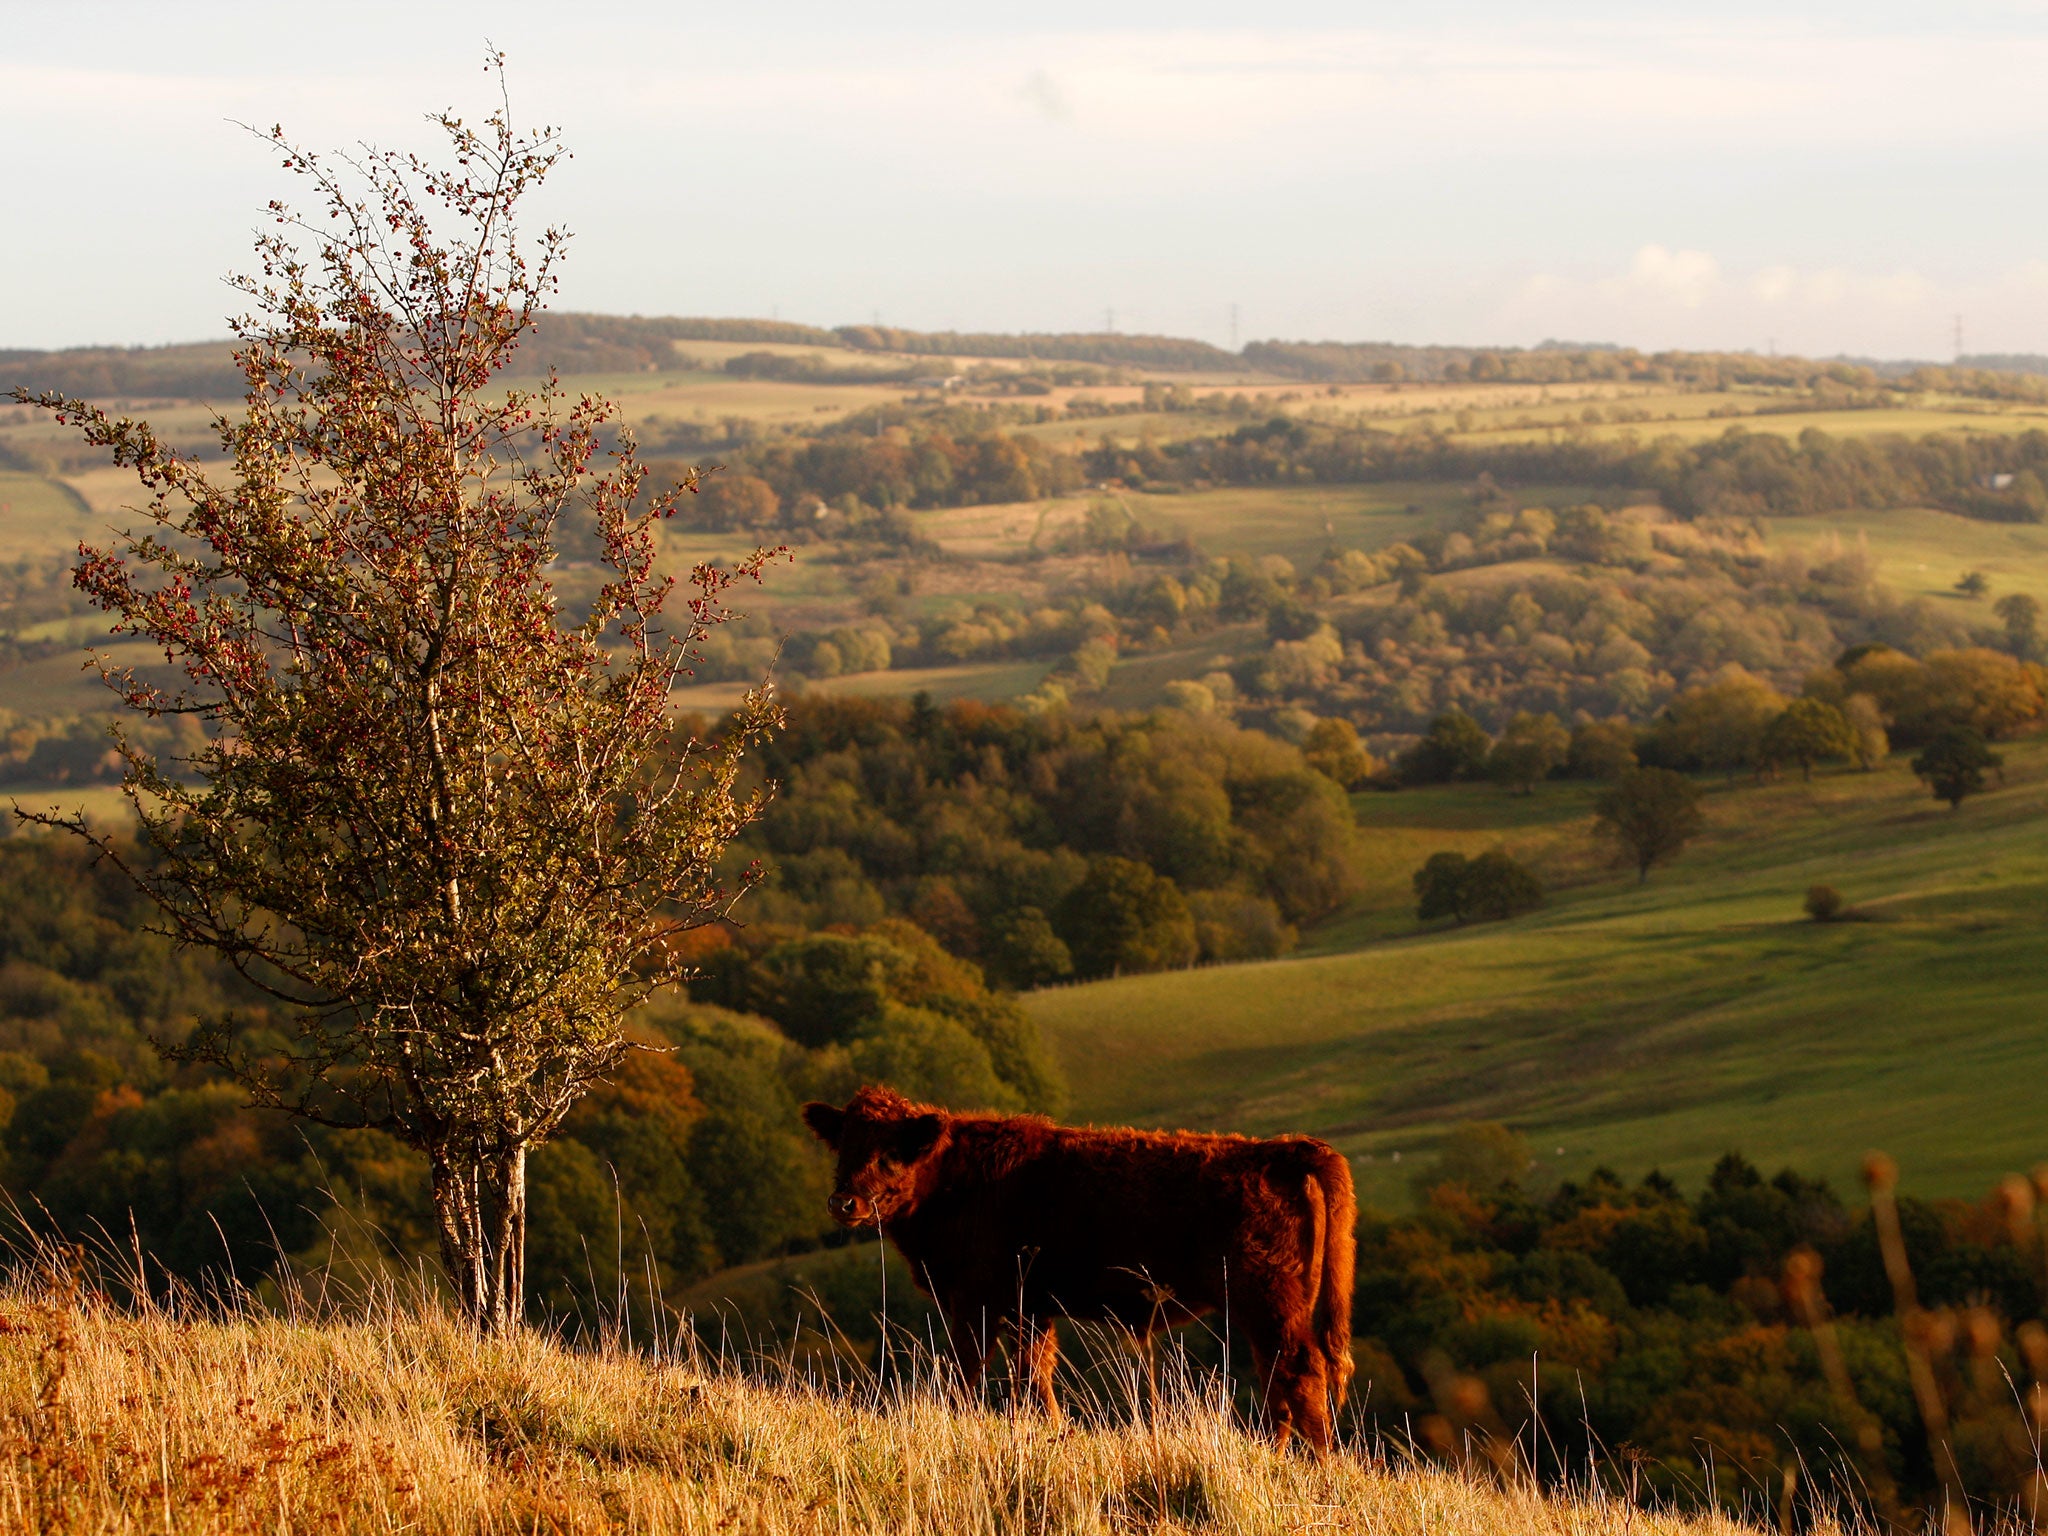 A cow grazes in the early morning sunlight on the upper slopes of Leckhampton Hill in the Cotswolds on October 25, 2011 in Cheltenham, England.